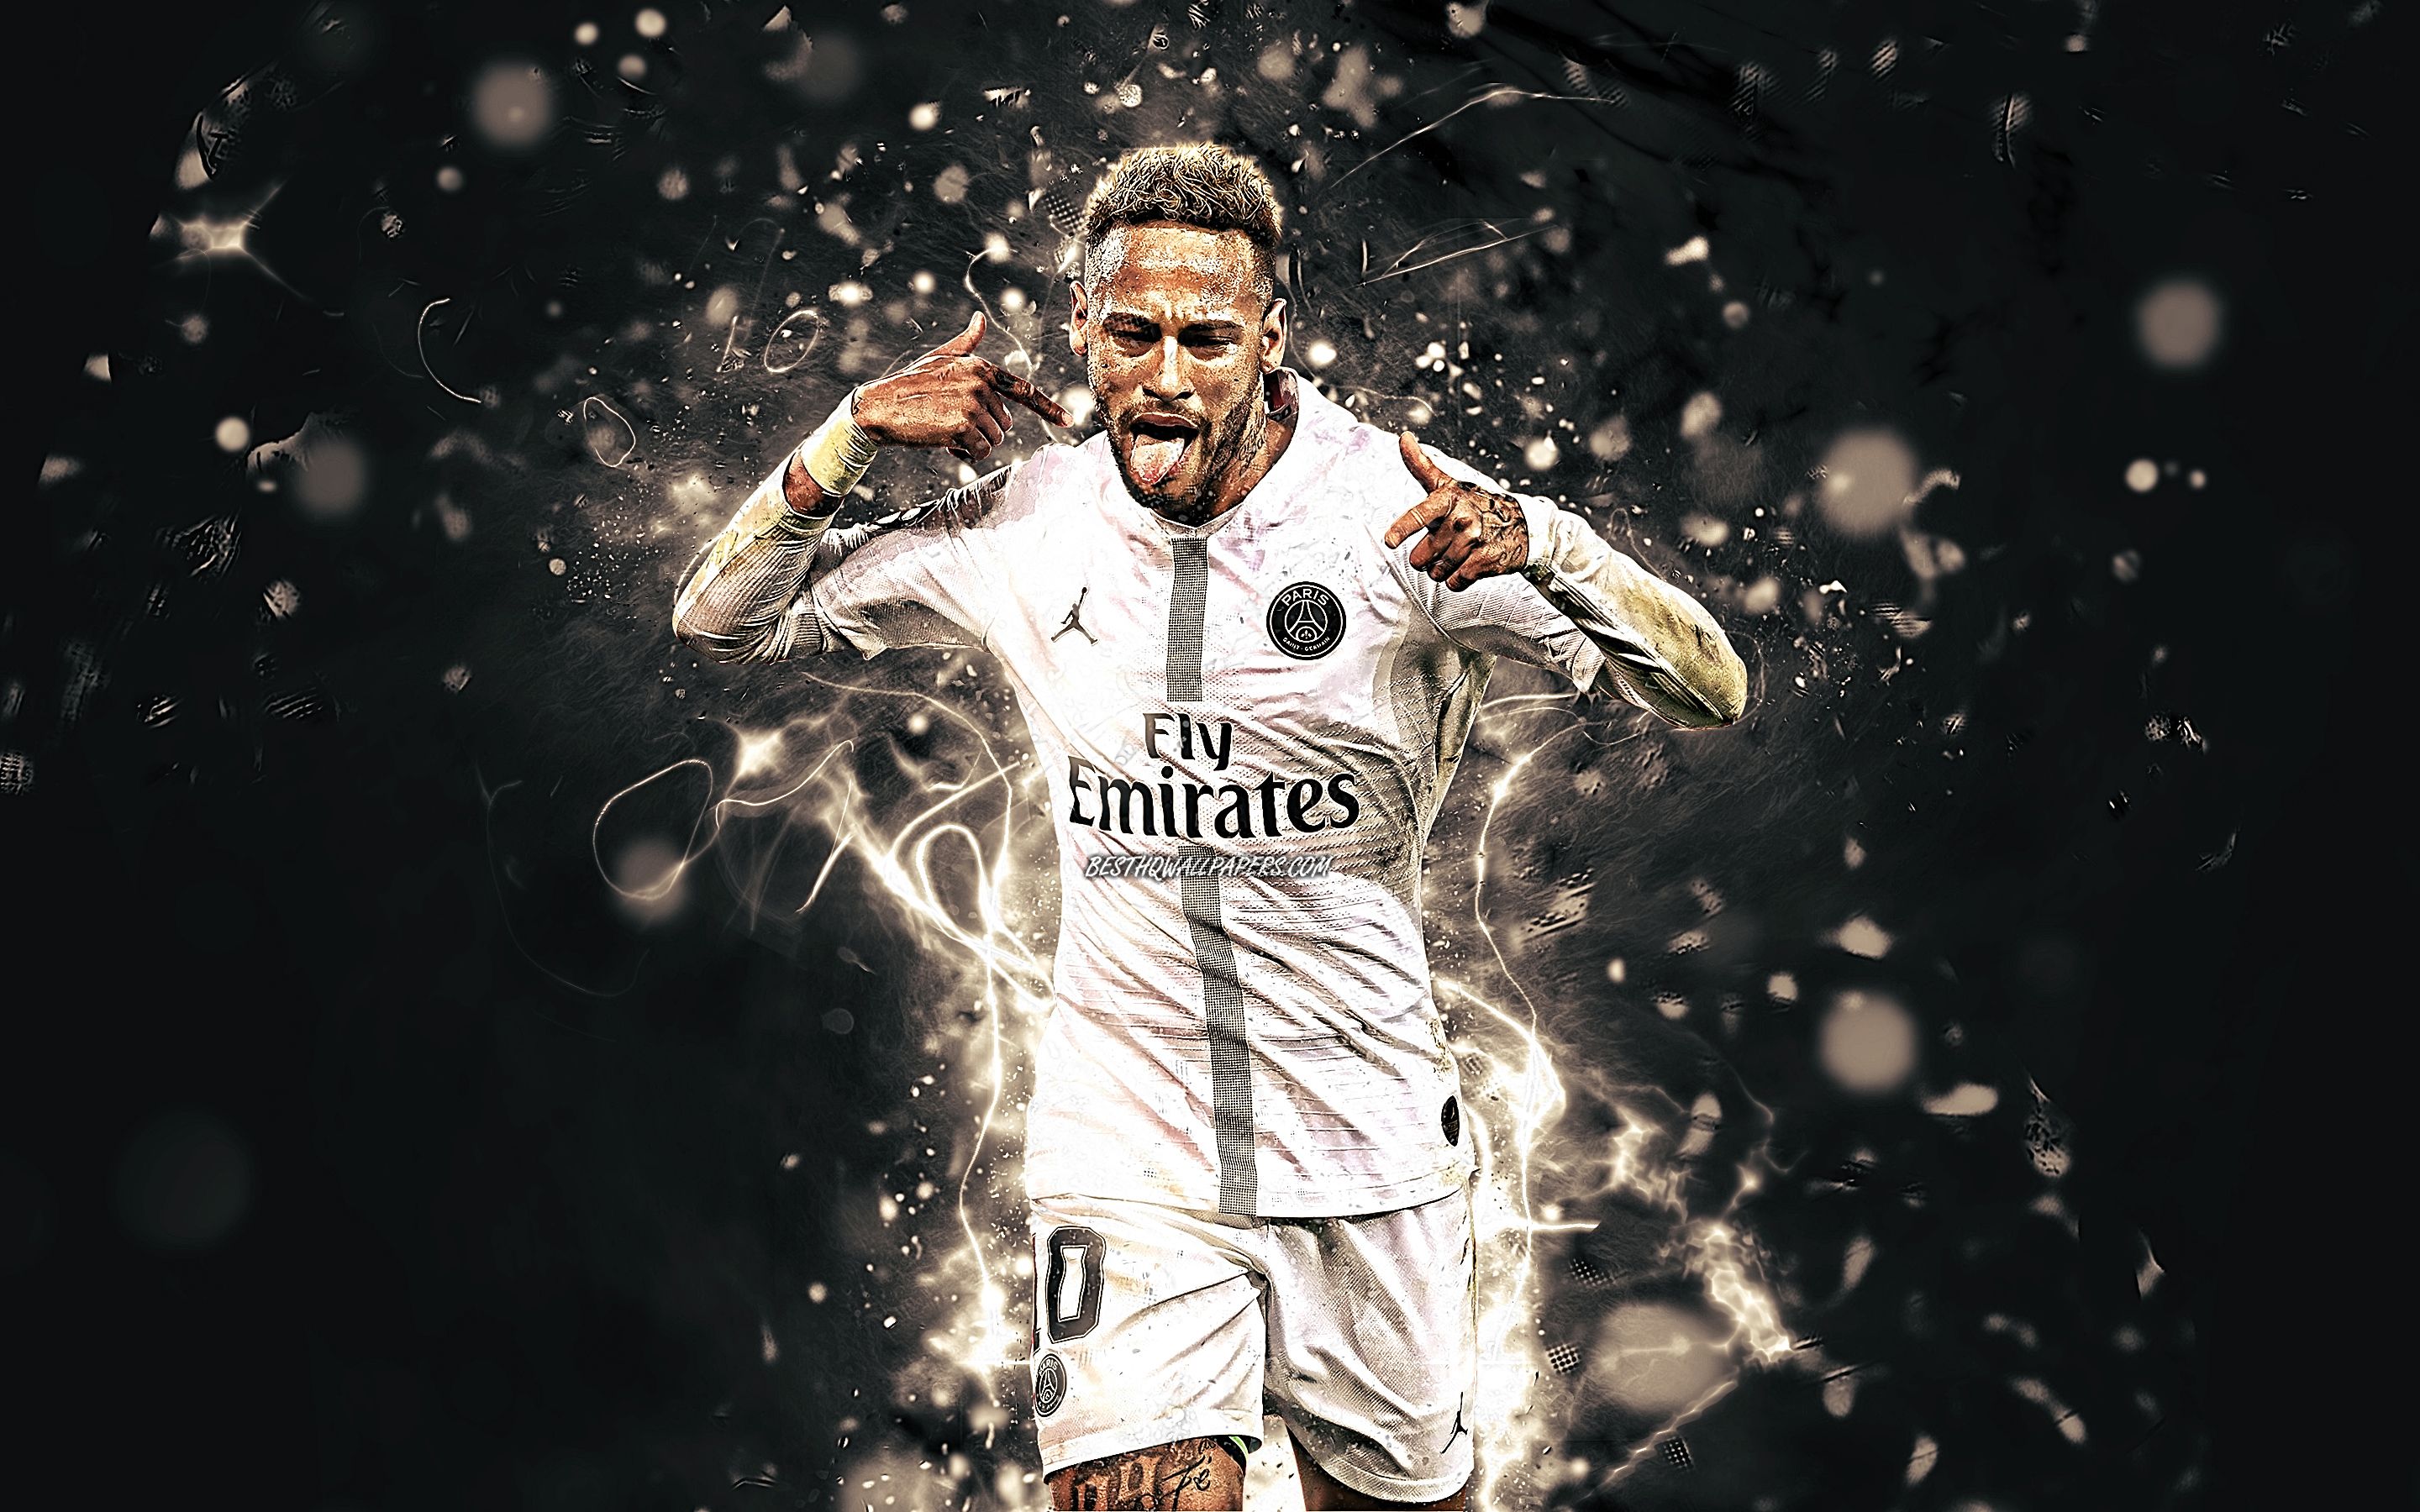 Neymar Jr Wallpapers posted by Christopher Peltier.